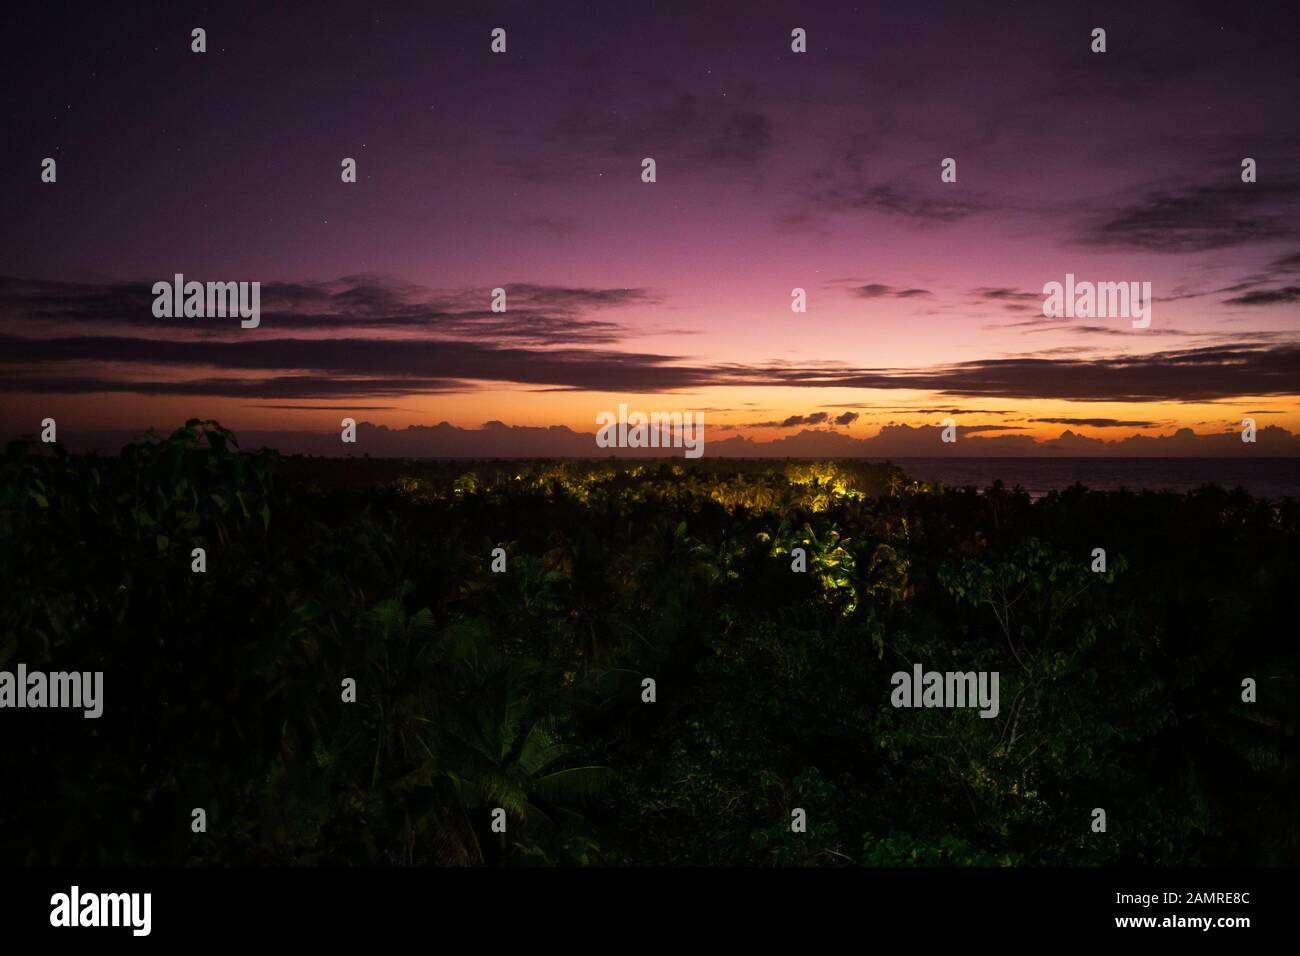 Stars from night sky fade into predawn color over tropical jungle lit by small village Stock Photo